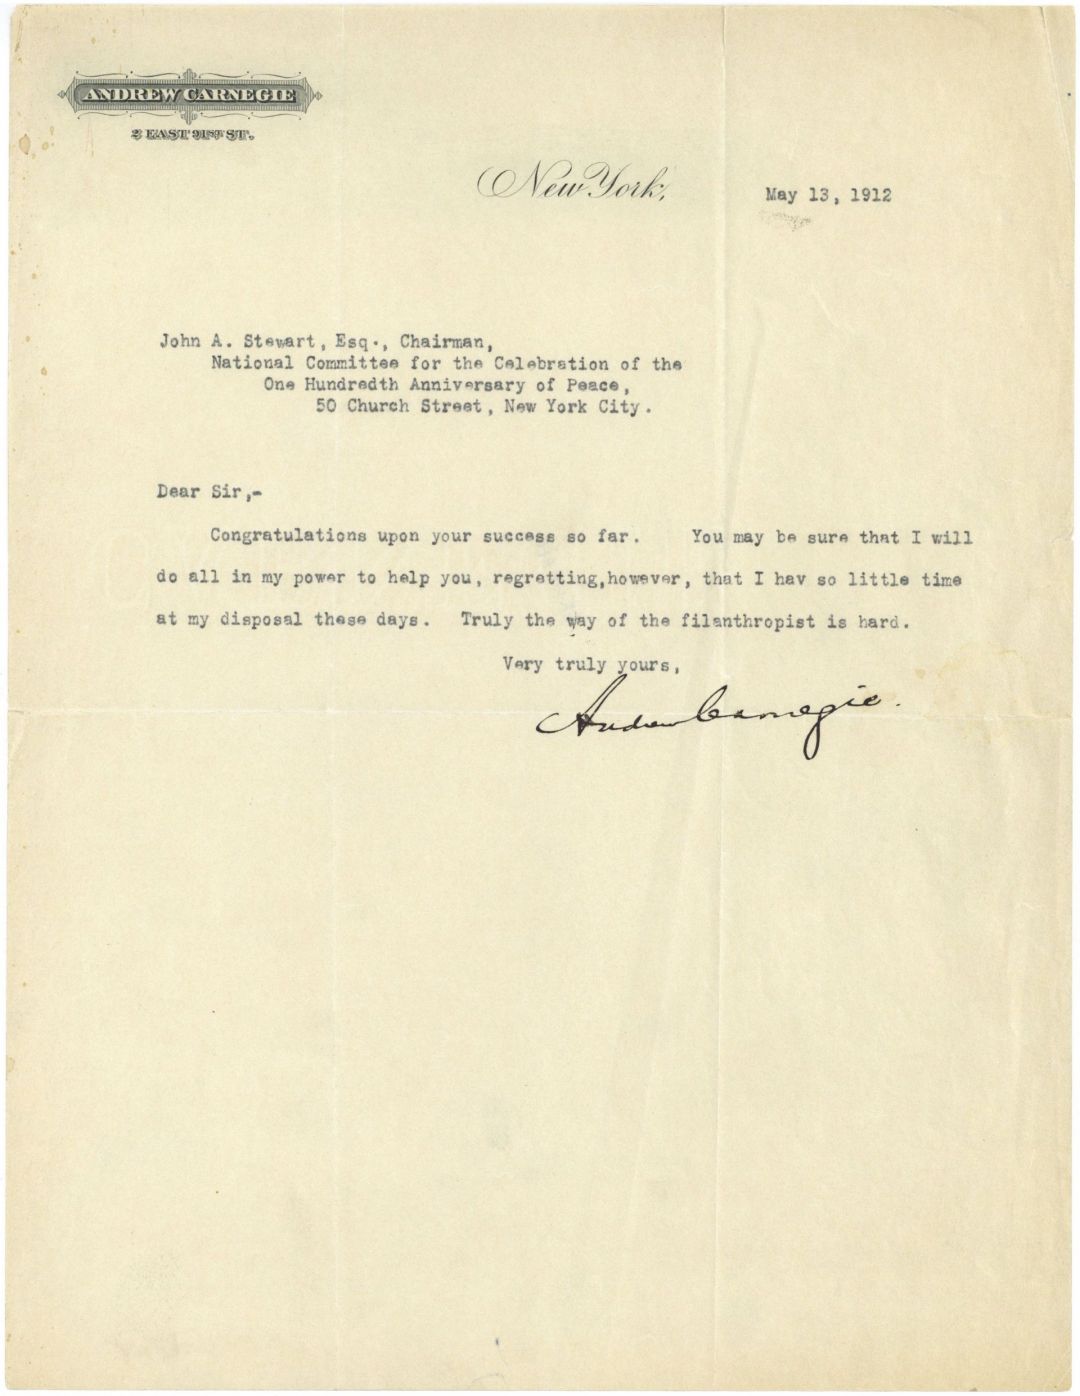 Andrew Carnegie signed Letter - Autograph dated May 13, 1912